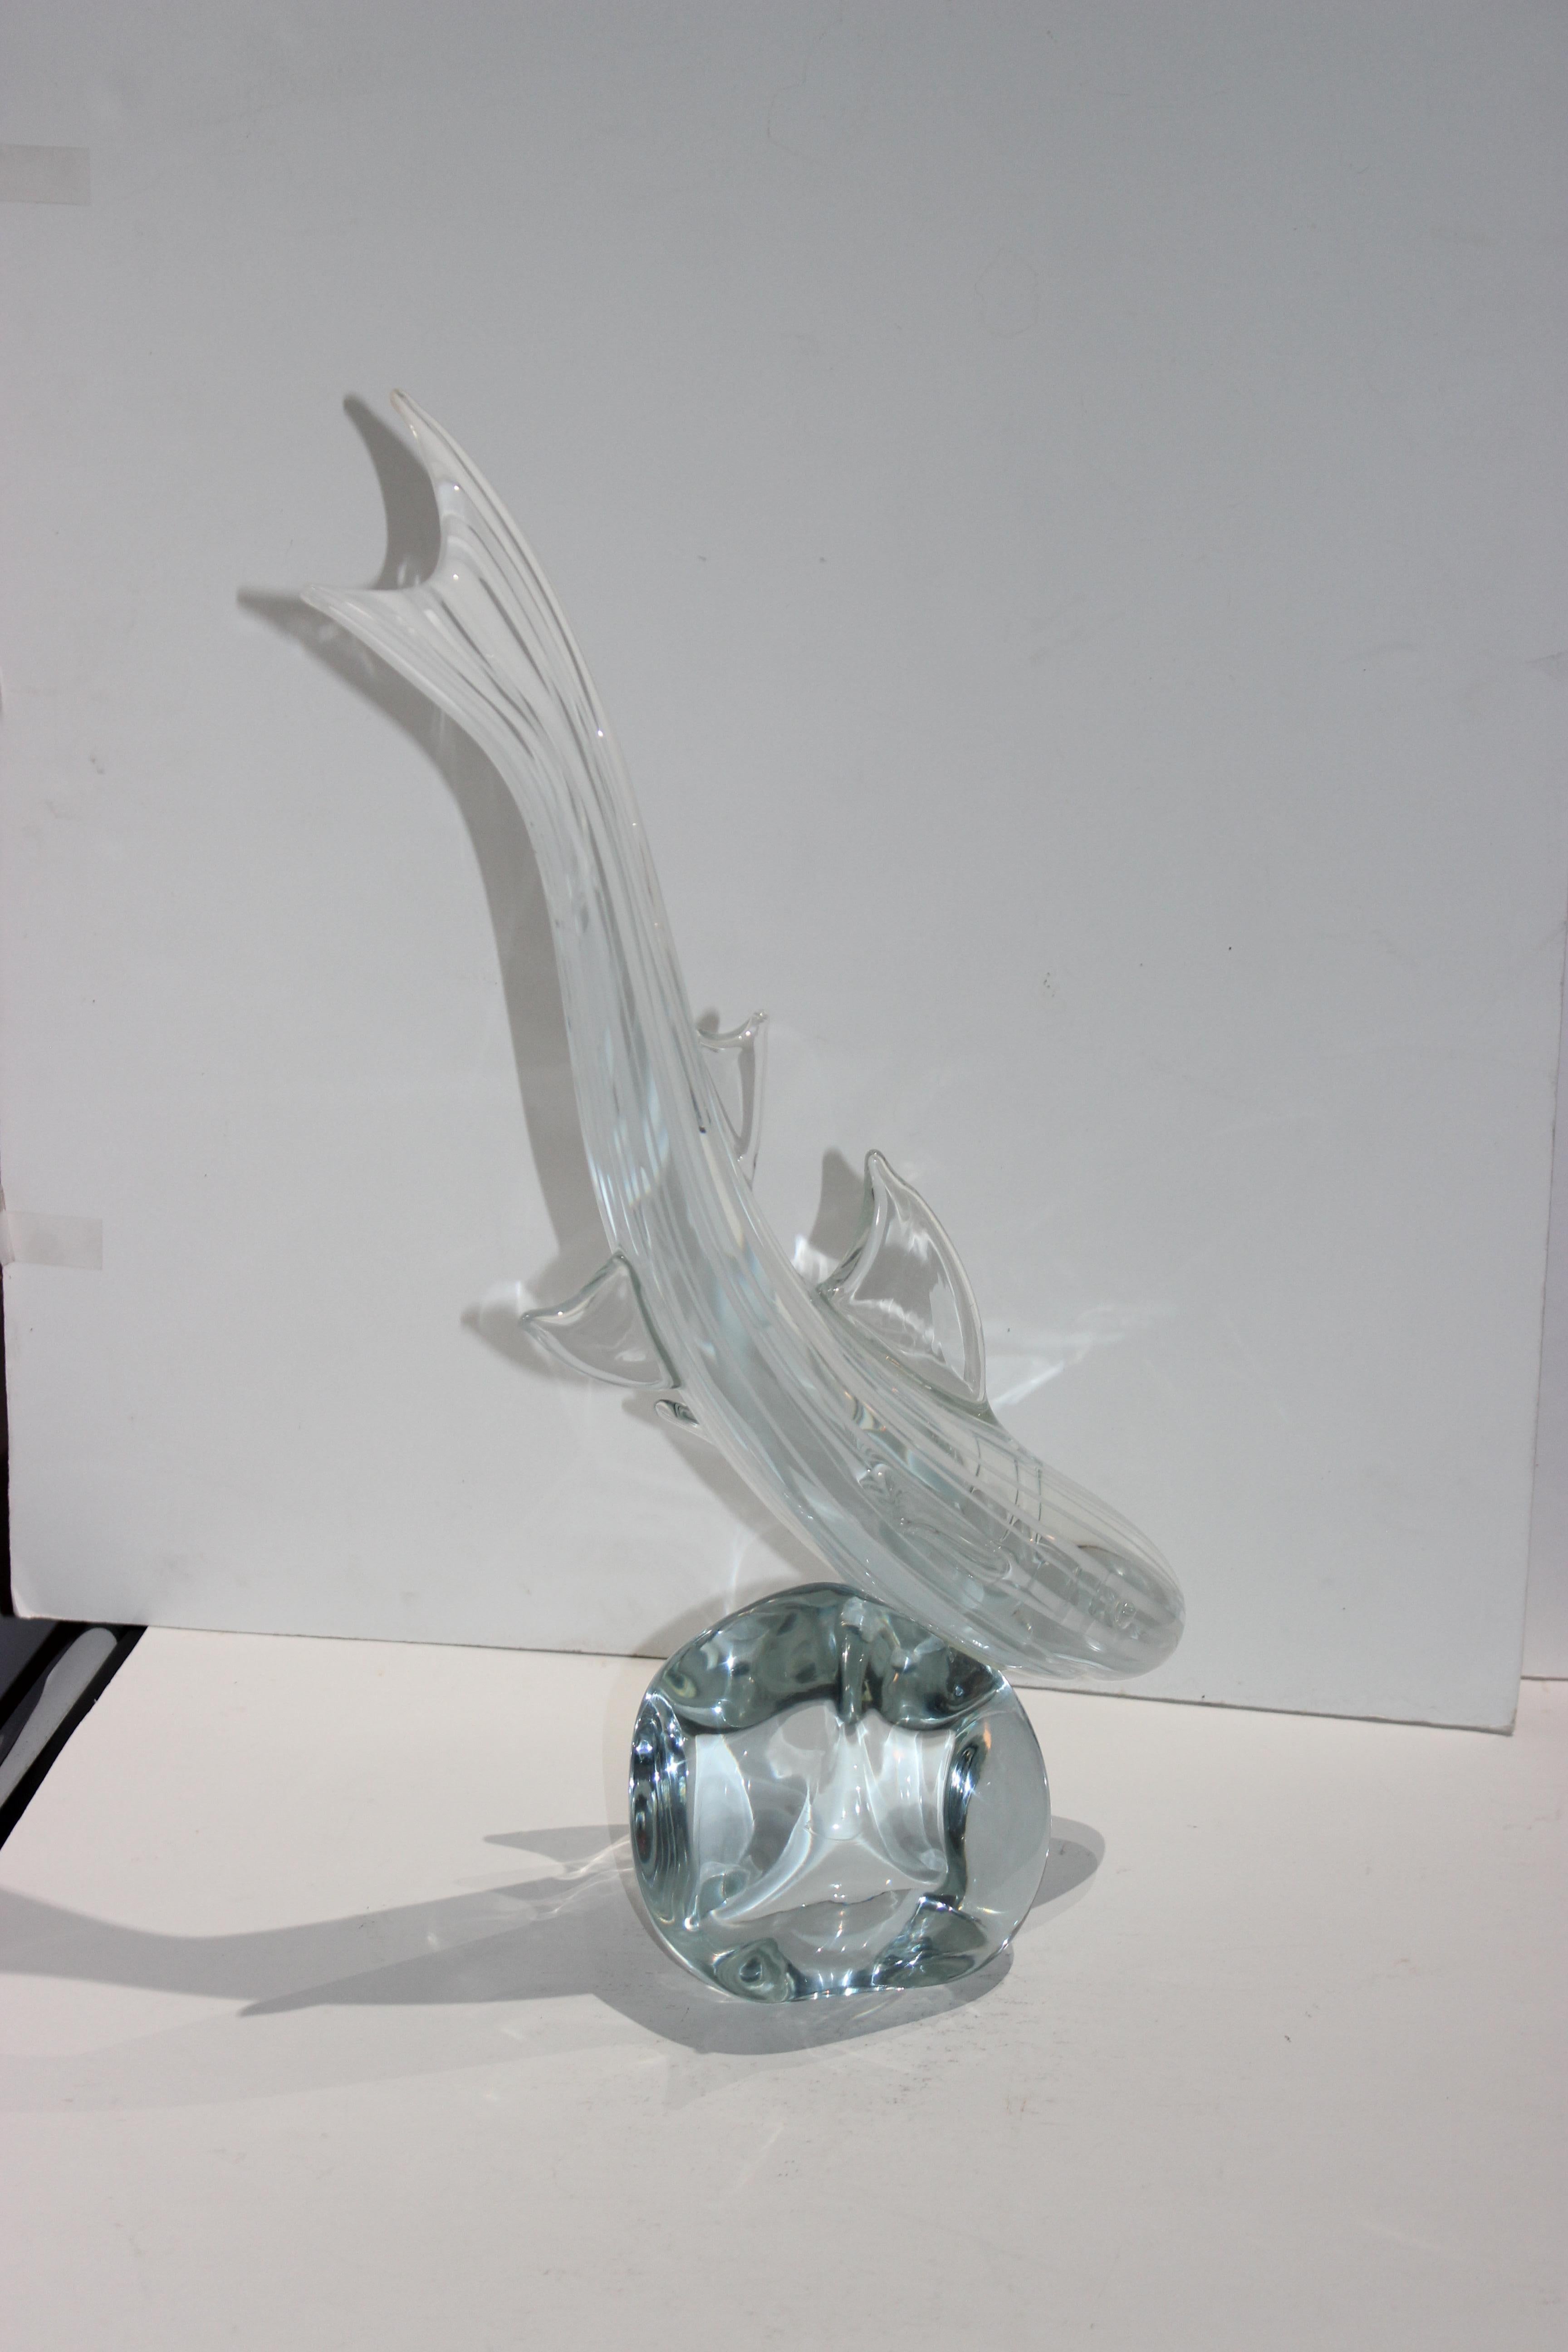 This large scale, stylish Murano glass sculpture of a shark dates to the 1980s and was created by the Italian firm of Oggetti.

Note: Signed on the verso by the glass artisan R. Auatzo.